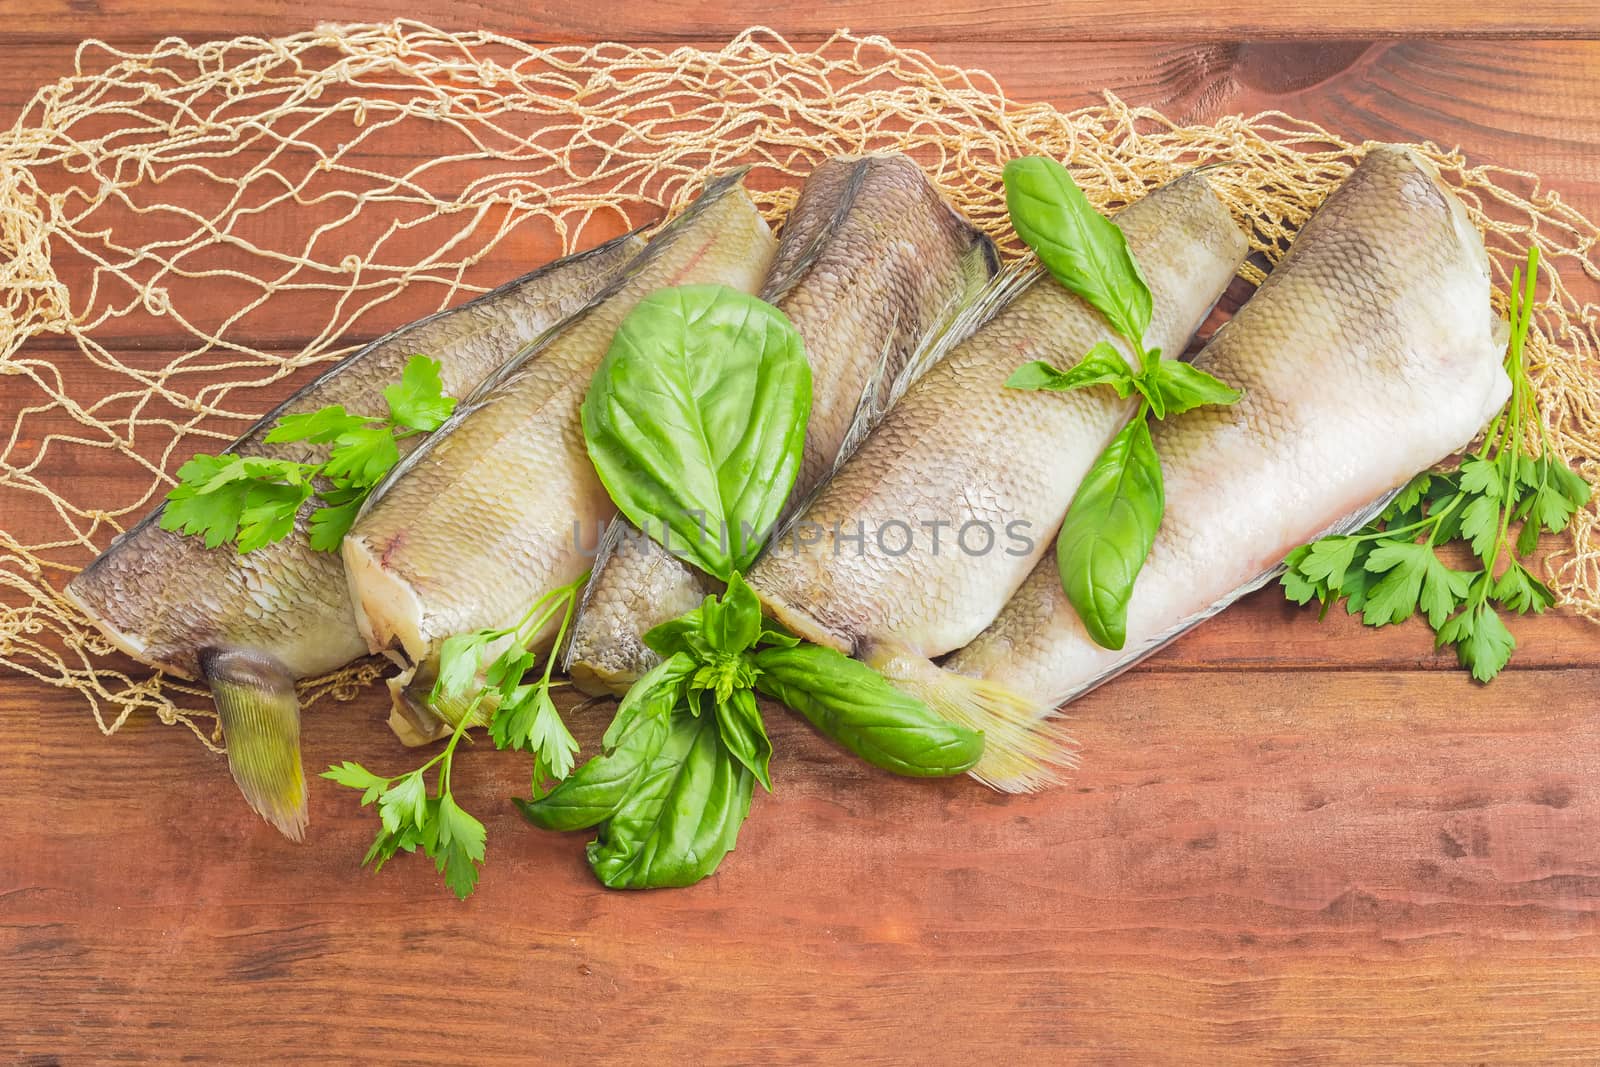 Uncooked carcasses of the notothenia fish on a wooden surface by anmbph